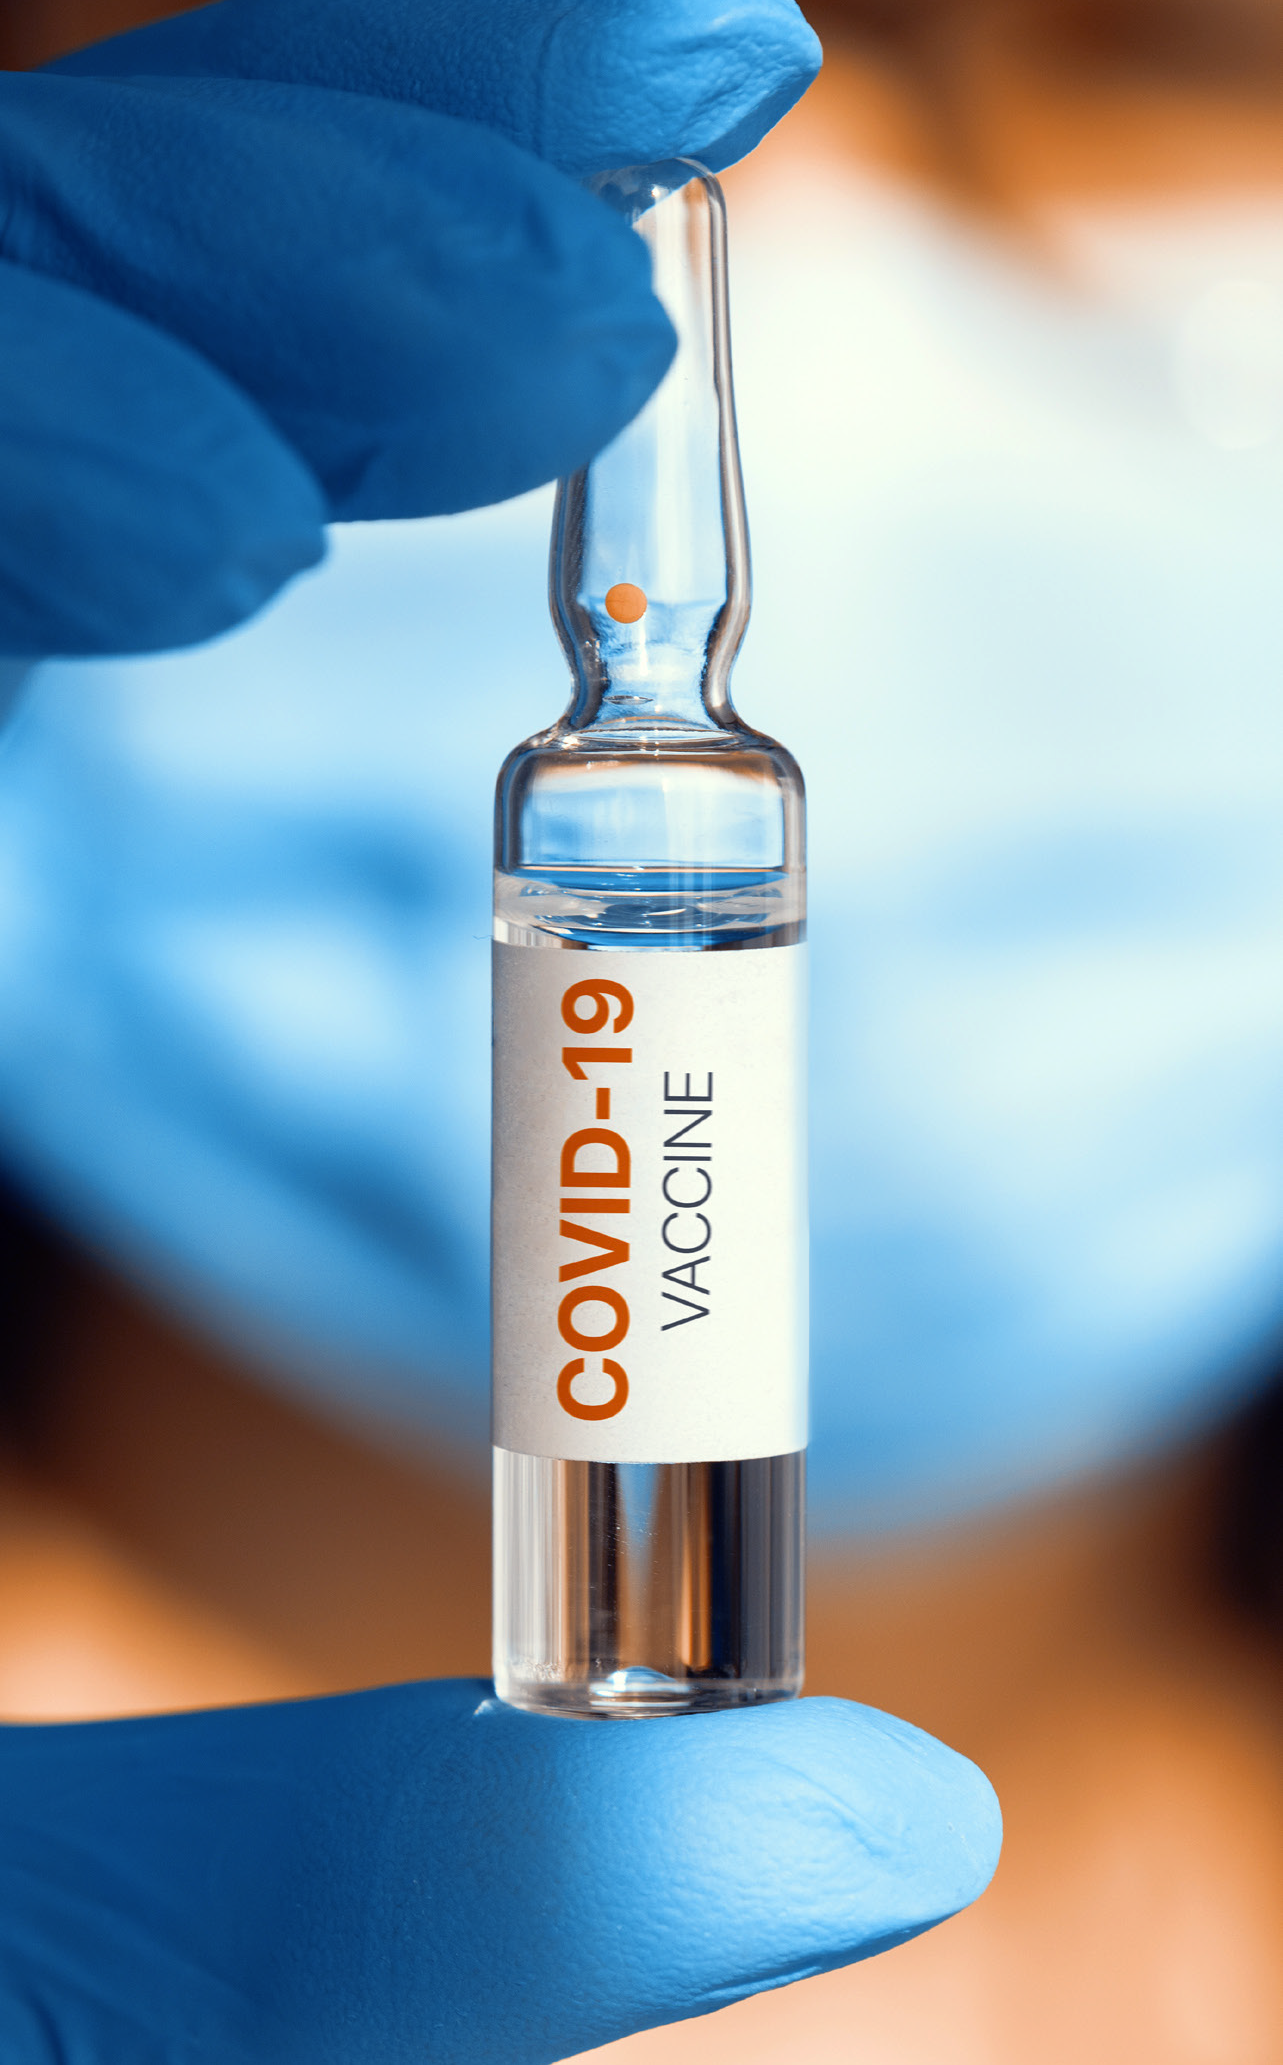 Essential Information on COVID-19 Vaccines